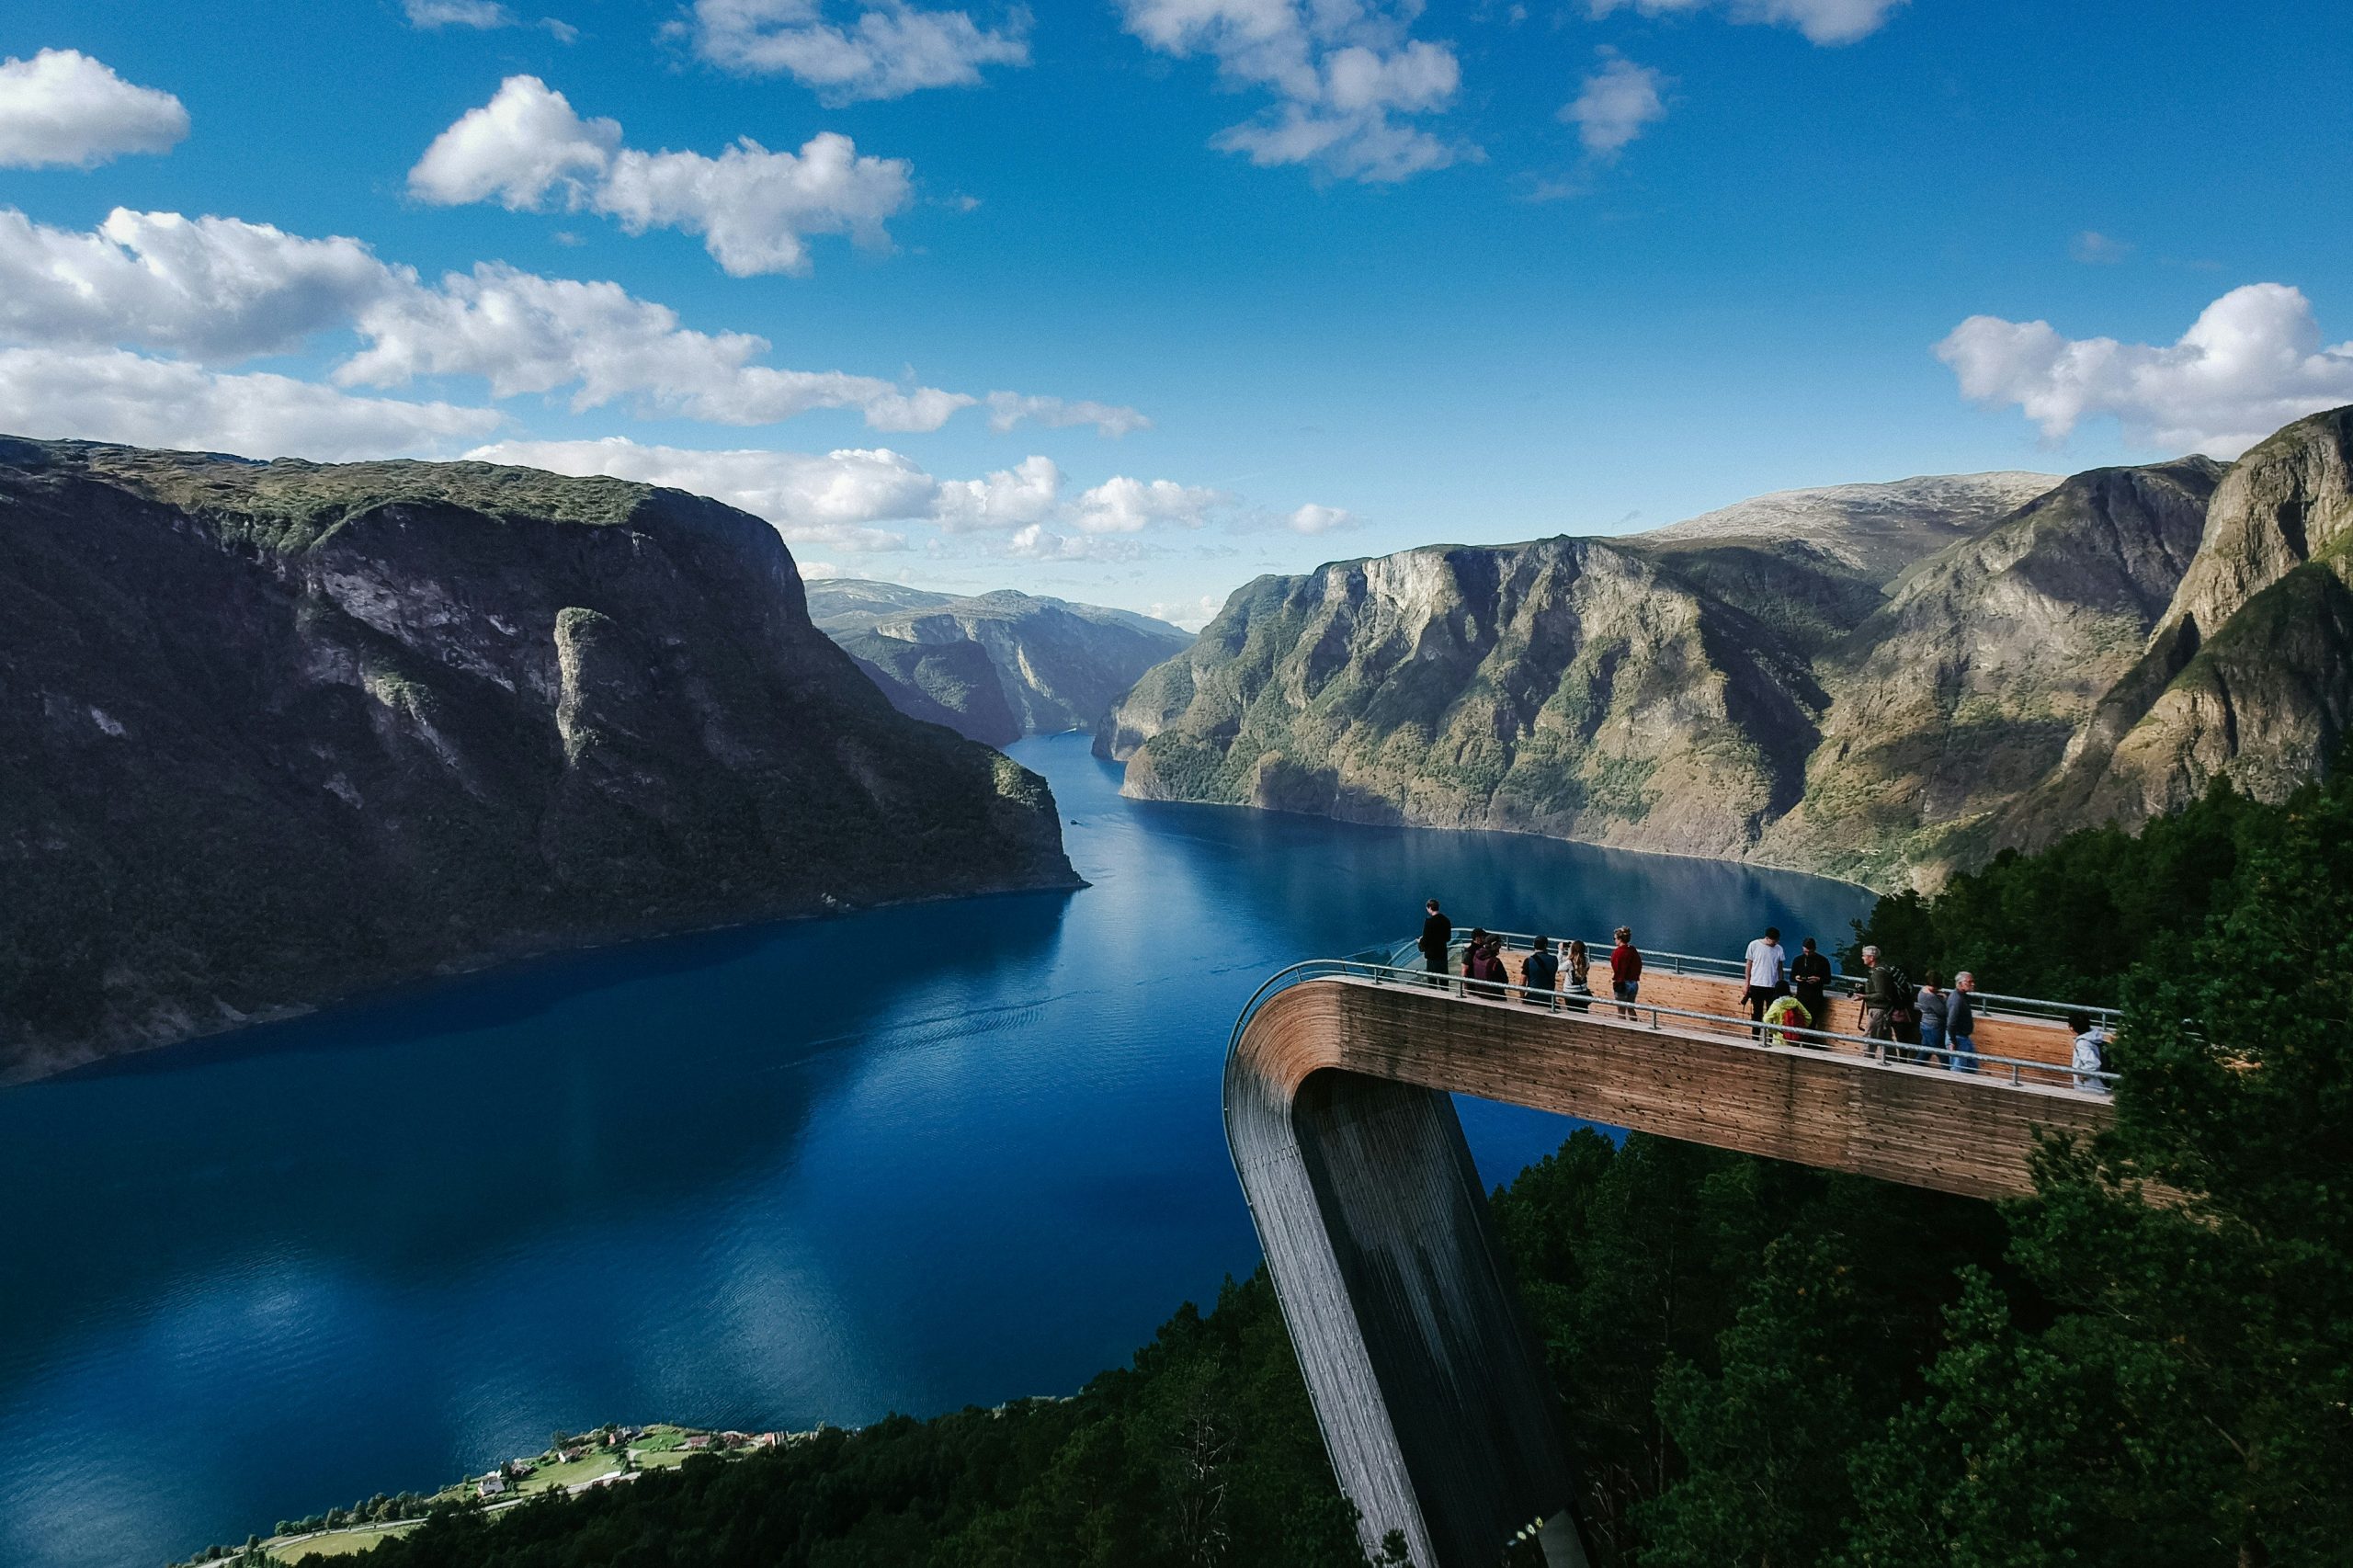 discover the breathtaking beauty of fjords in this immersive travel experience. explore dramatic landscapes and serene waters in our fjords adventure guide.